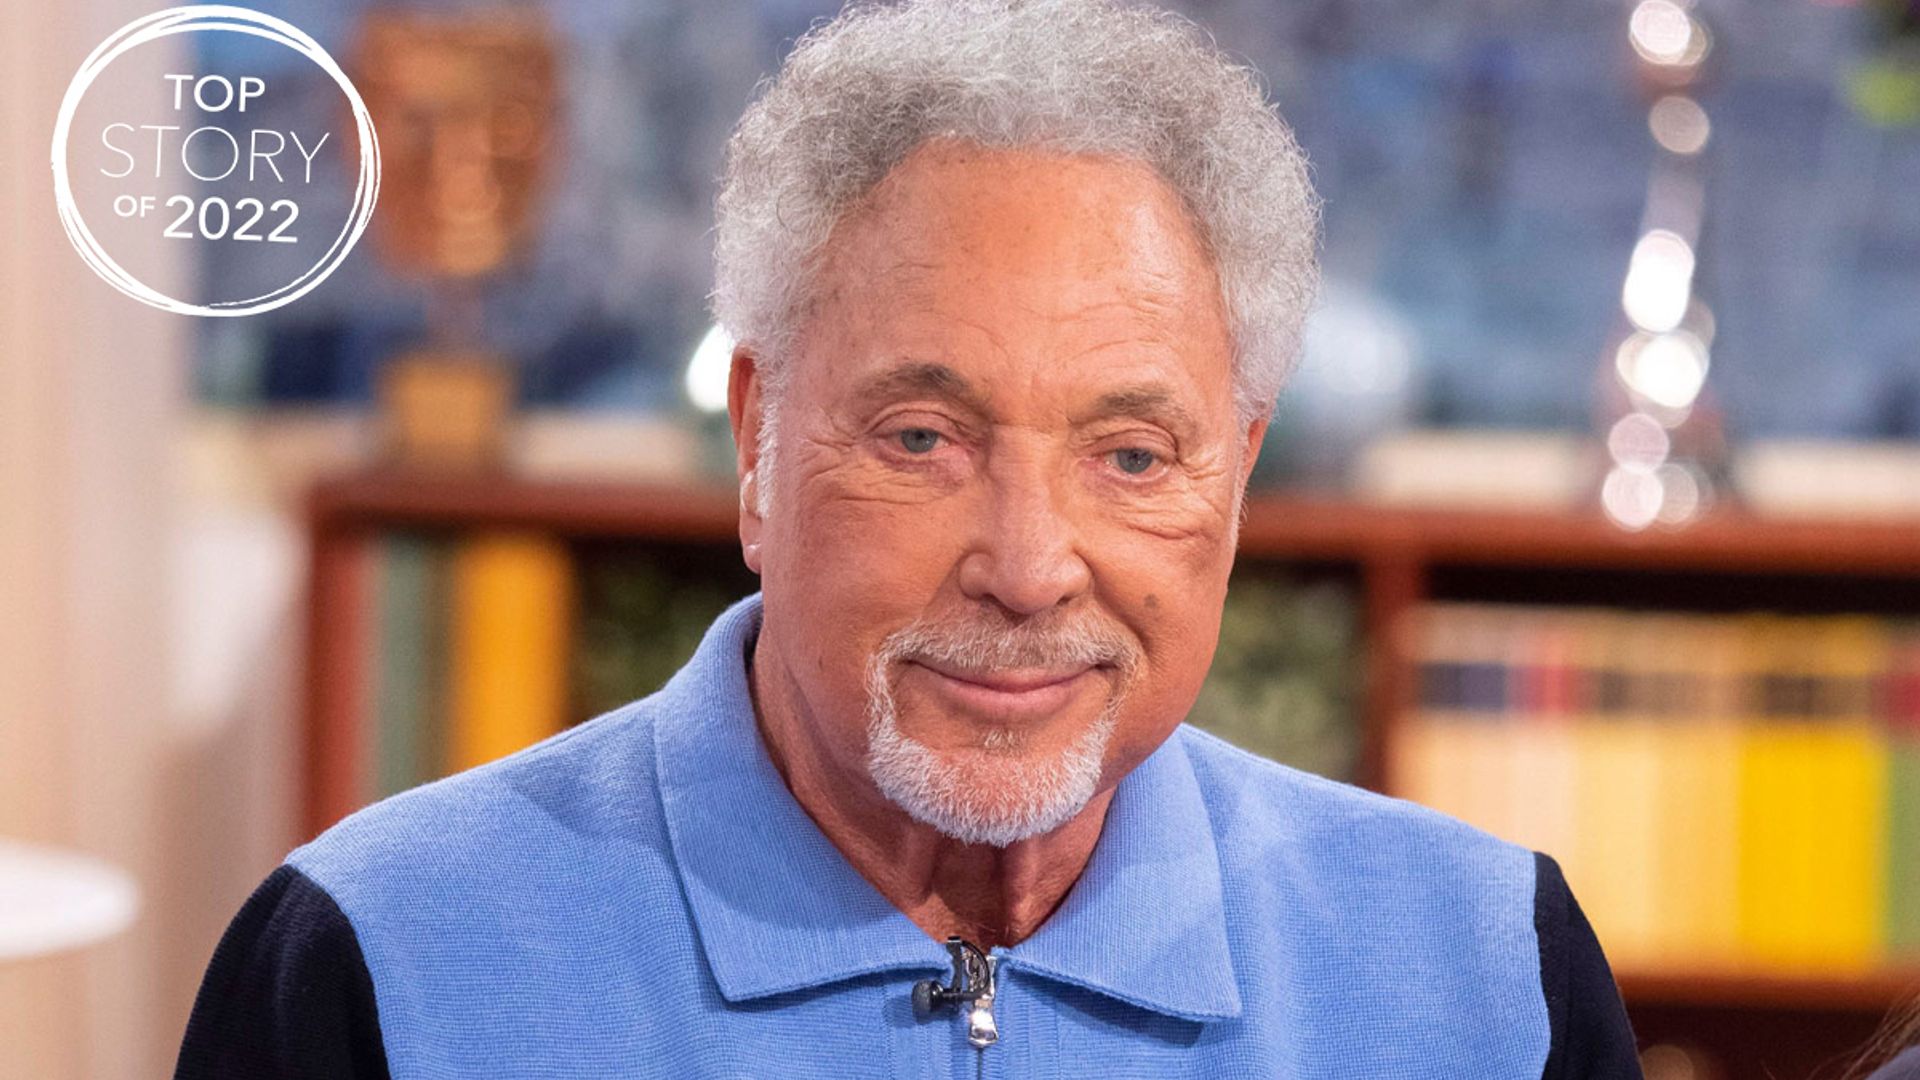 Tom Jones shares upsetting news as he sets the record straight on